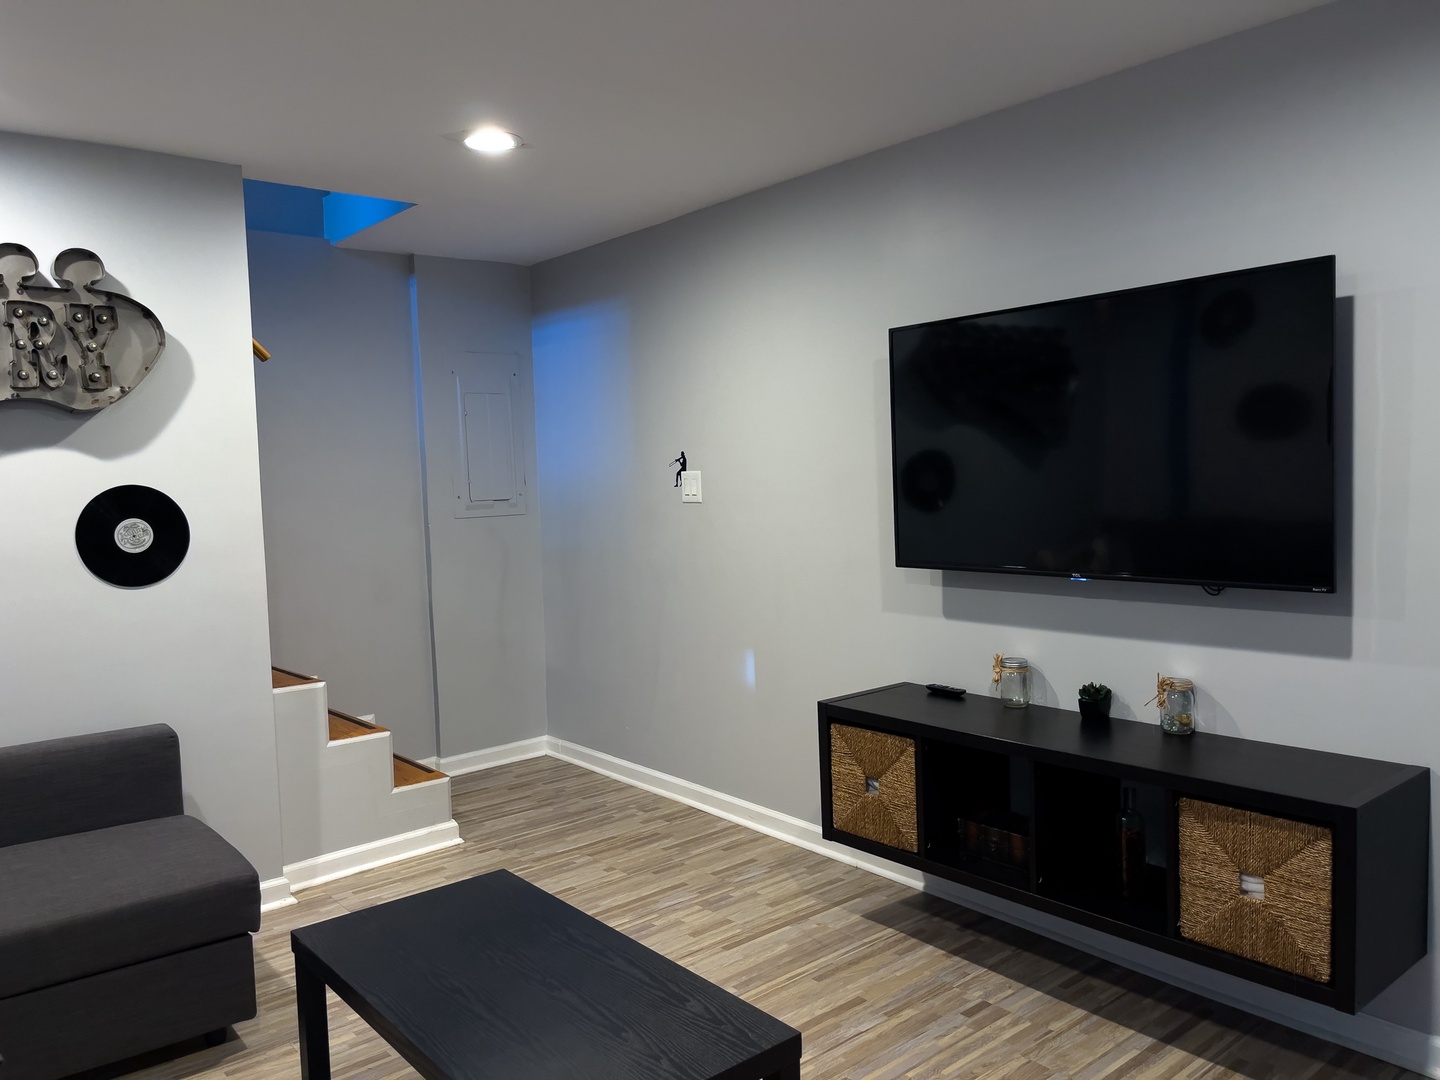 Basement living room with Smart TV, and pull out sofa